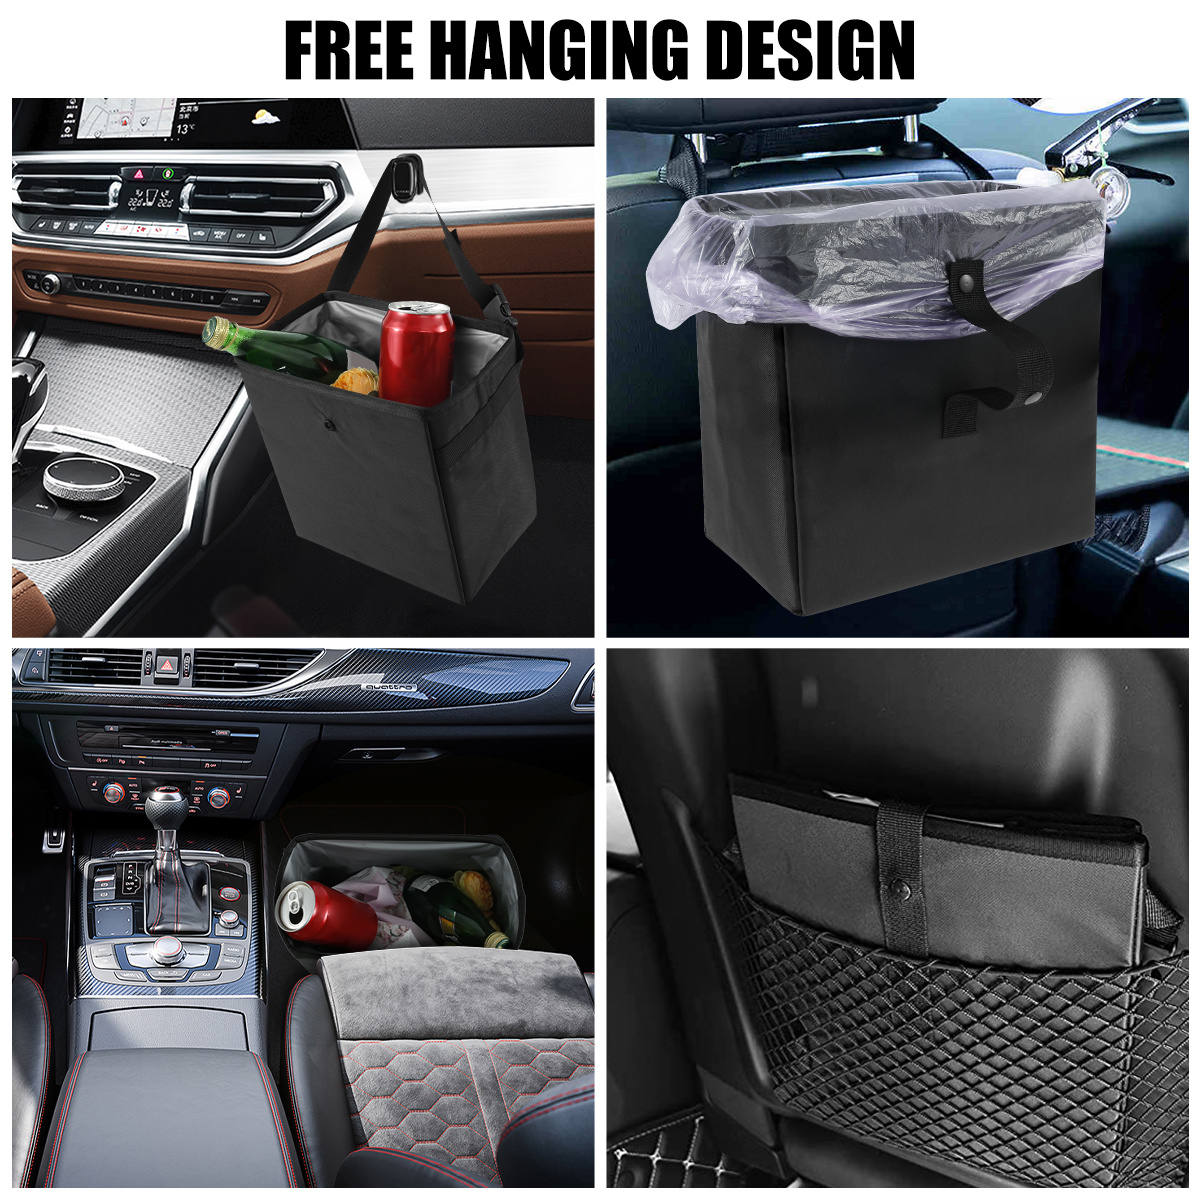 Ryhpez Car Trash Can with Lid - Car Trash Bag Hanging with Storage Pockets,  Leak-Proof Collapsible Garbage Bin for Car(3.2 Gallon/12L)